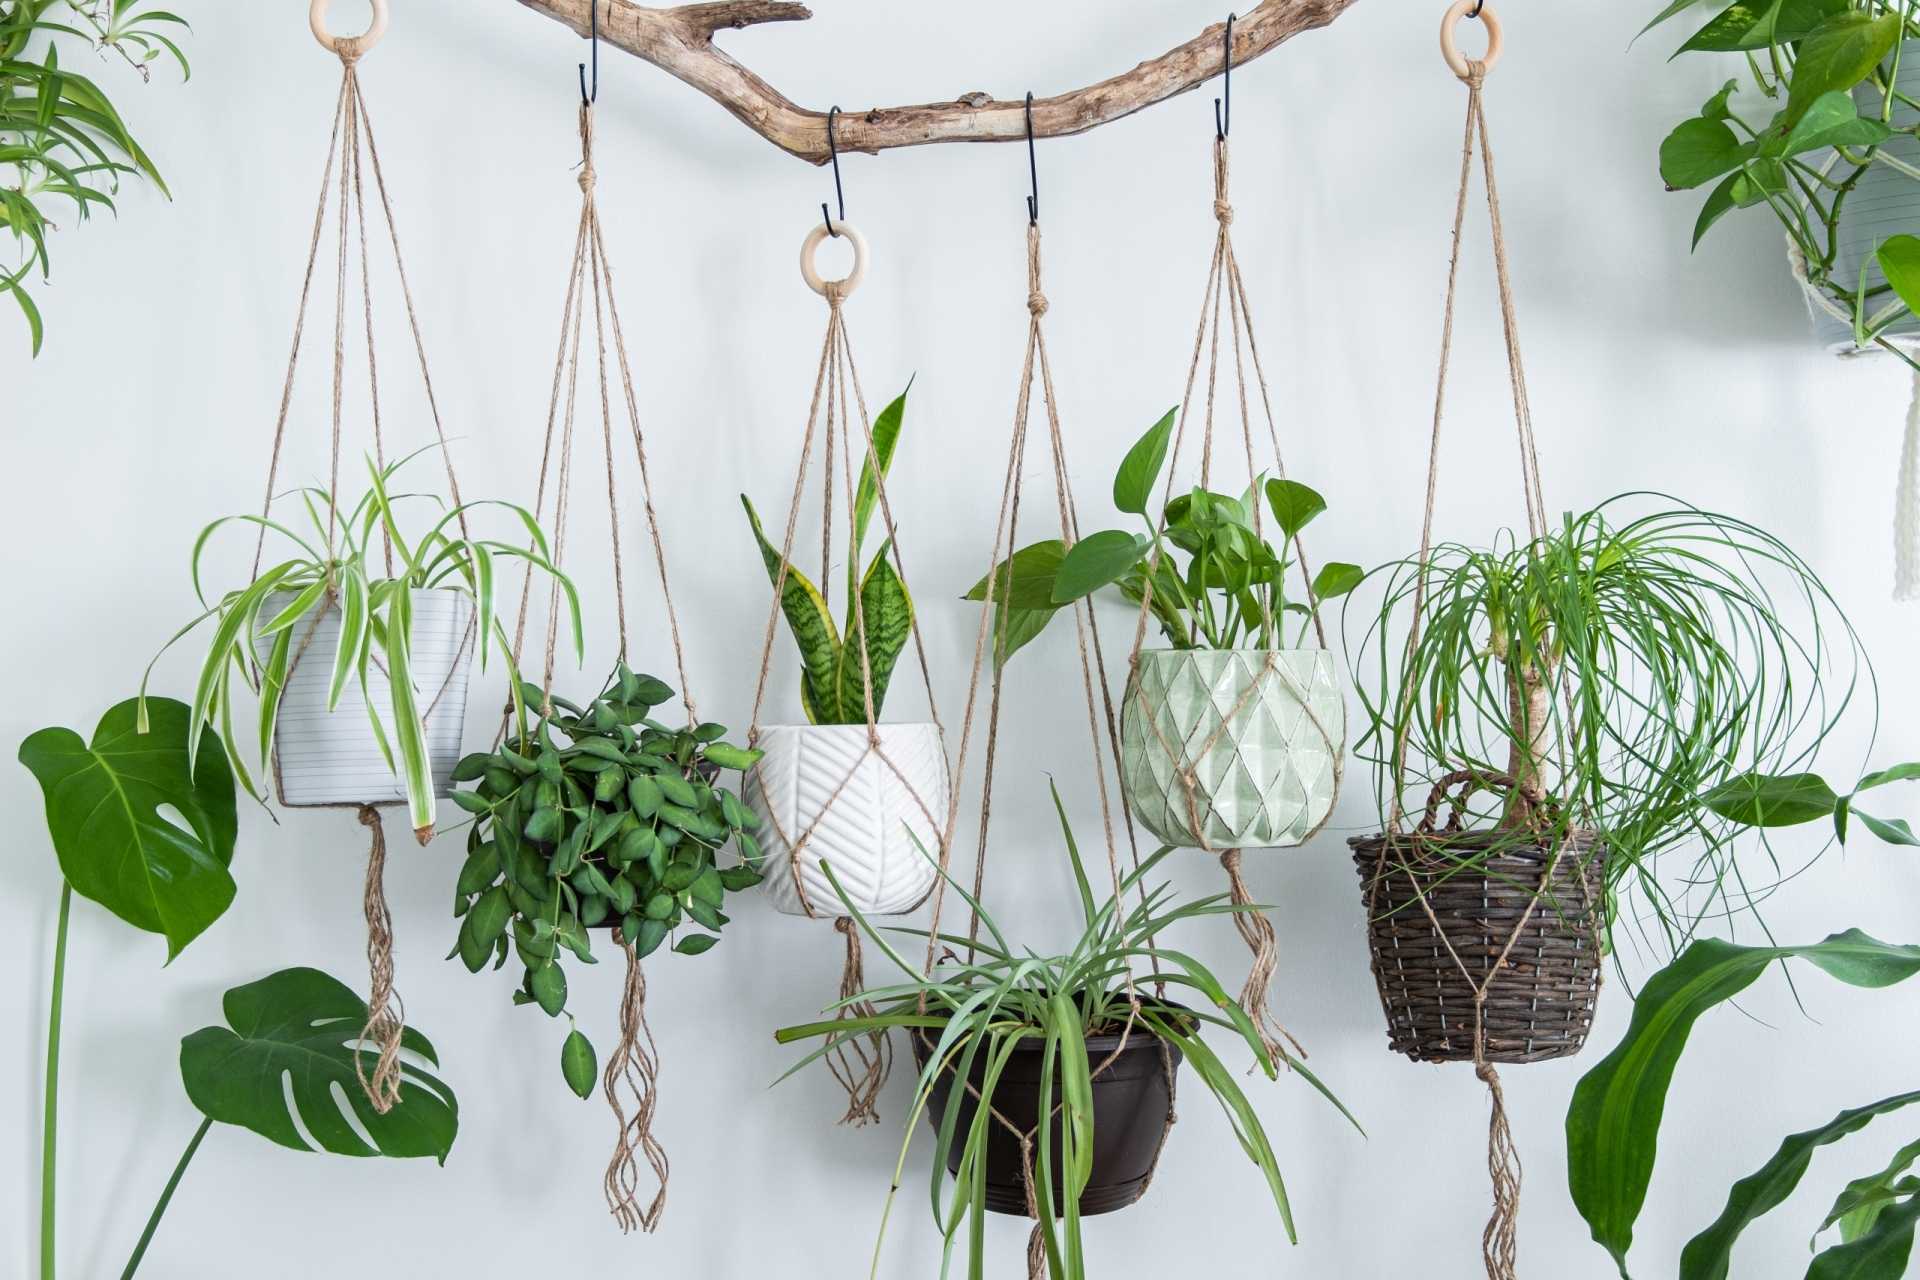 If you have a tight house, don't worry because there are 6 types of hanging plants for you to choose from - Photo 1.